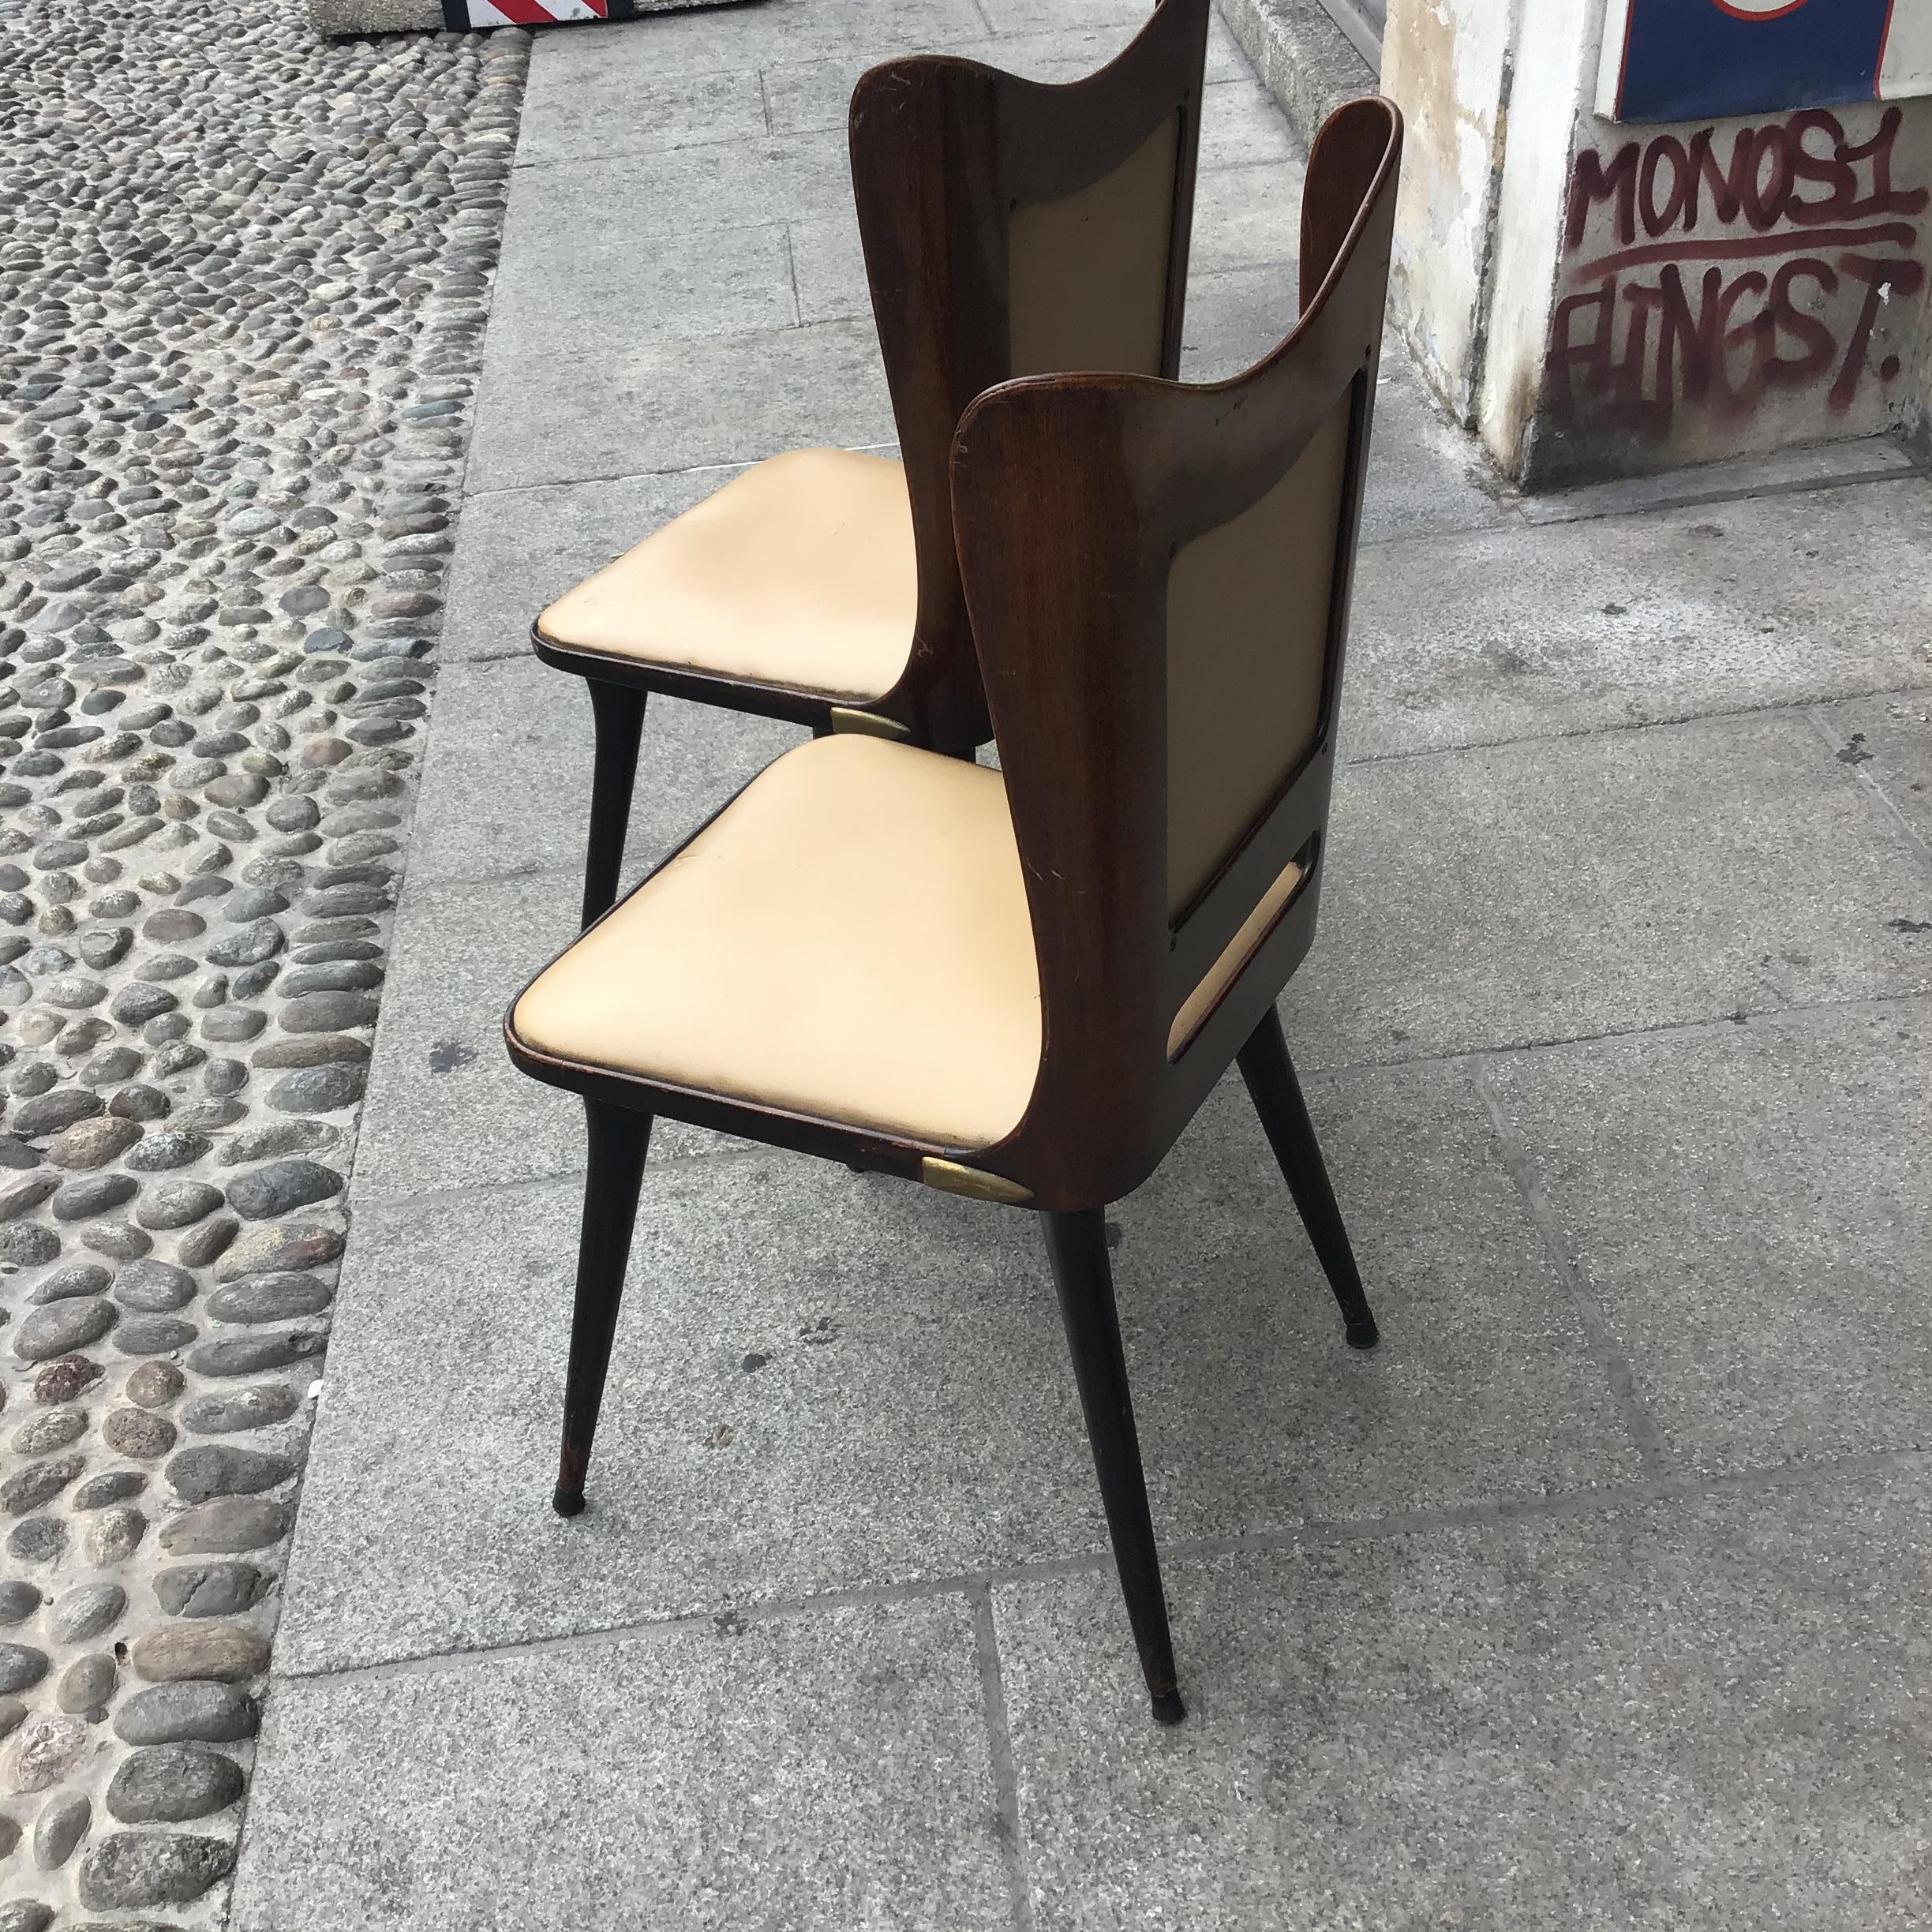 Mid-20th Century Carlo Ratti Chairs Wood Brass Skin 1955, Italy For Sale